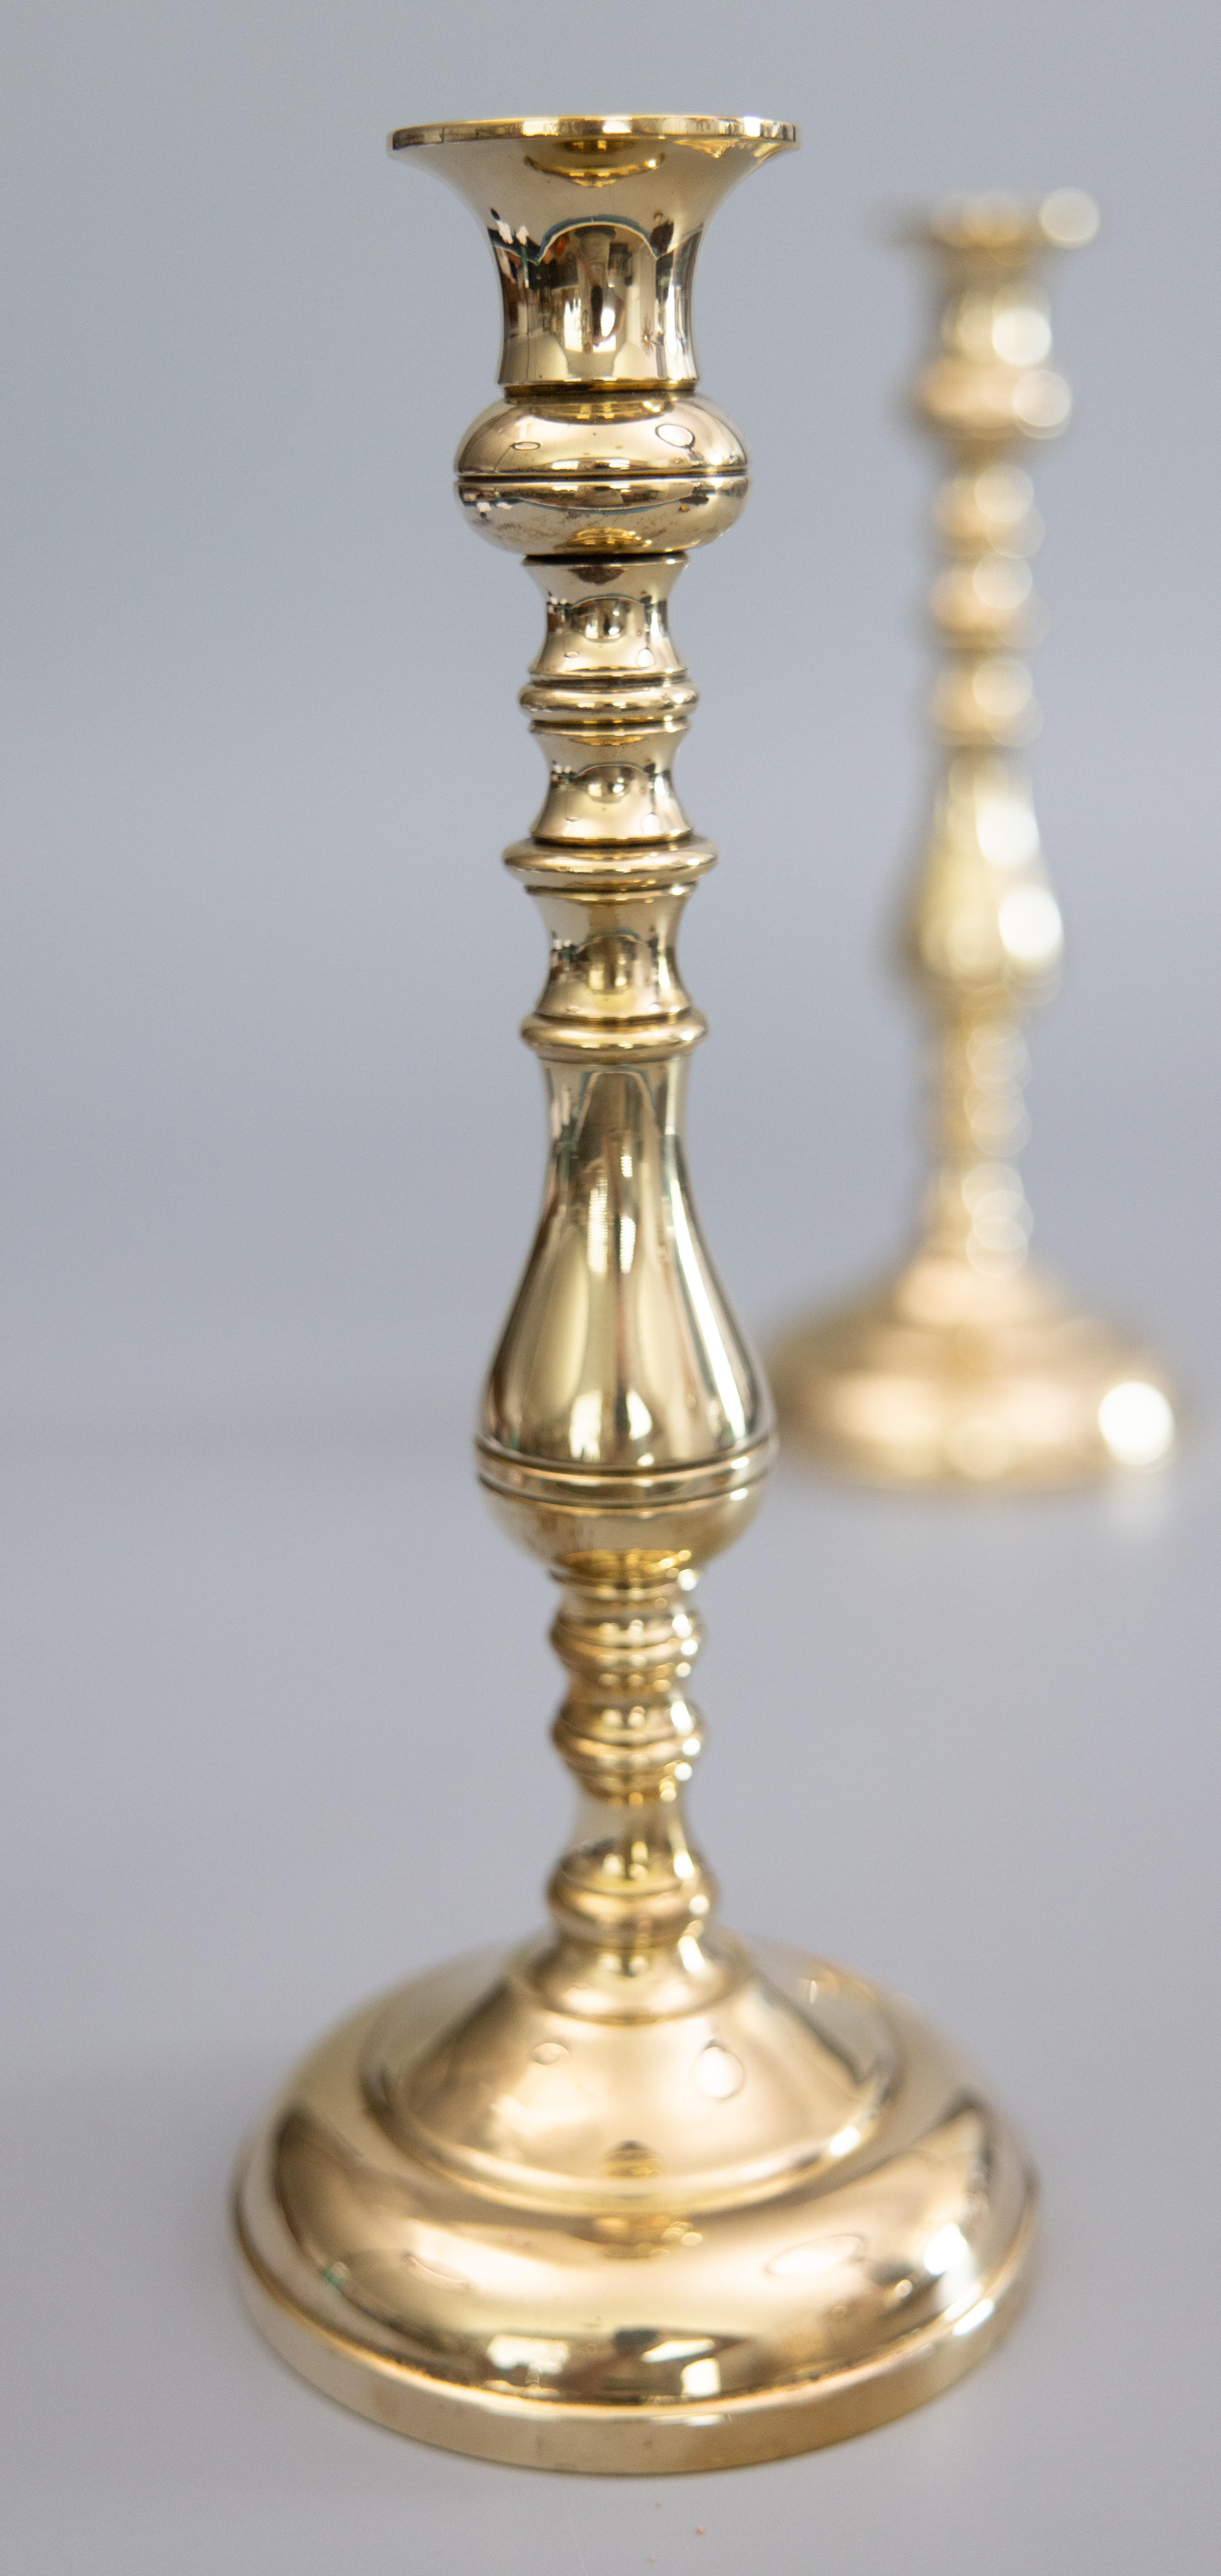 A fine tall pair of antique 19th-Century English Queen Anne style solid brass candlesticks with a lovely polished brass patina. These handsome candle holders are solid and heavy, together weighing over 5 lbs, and they display